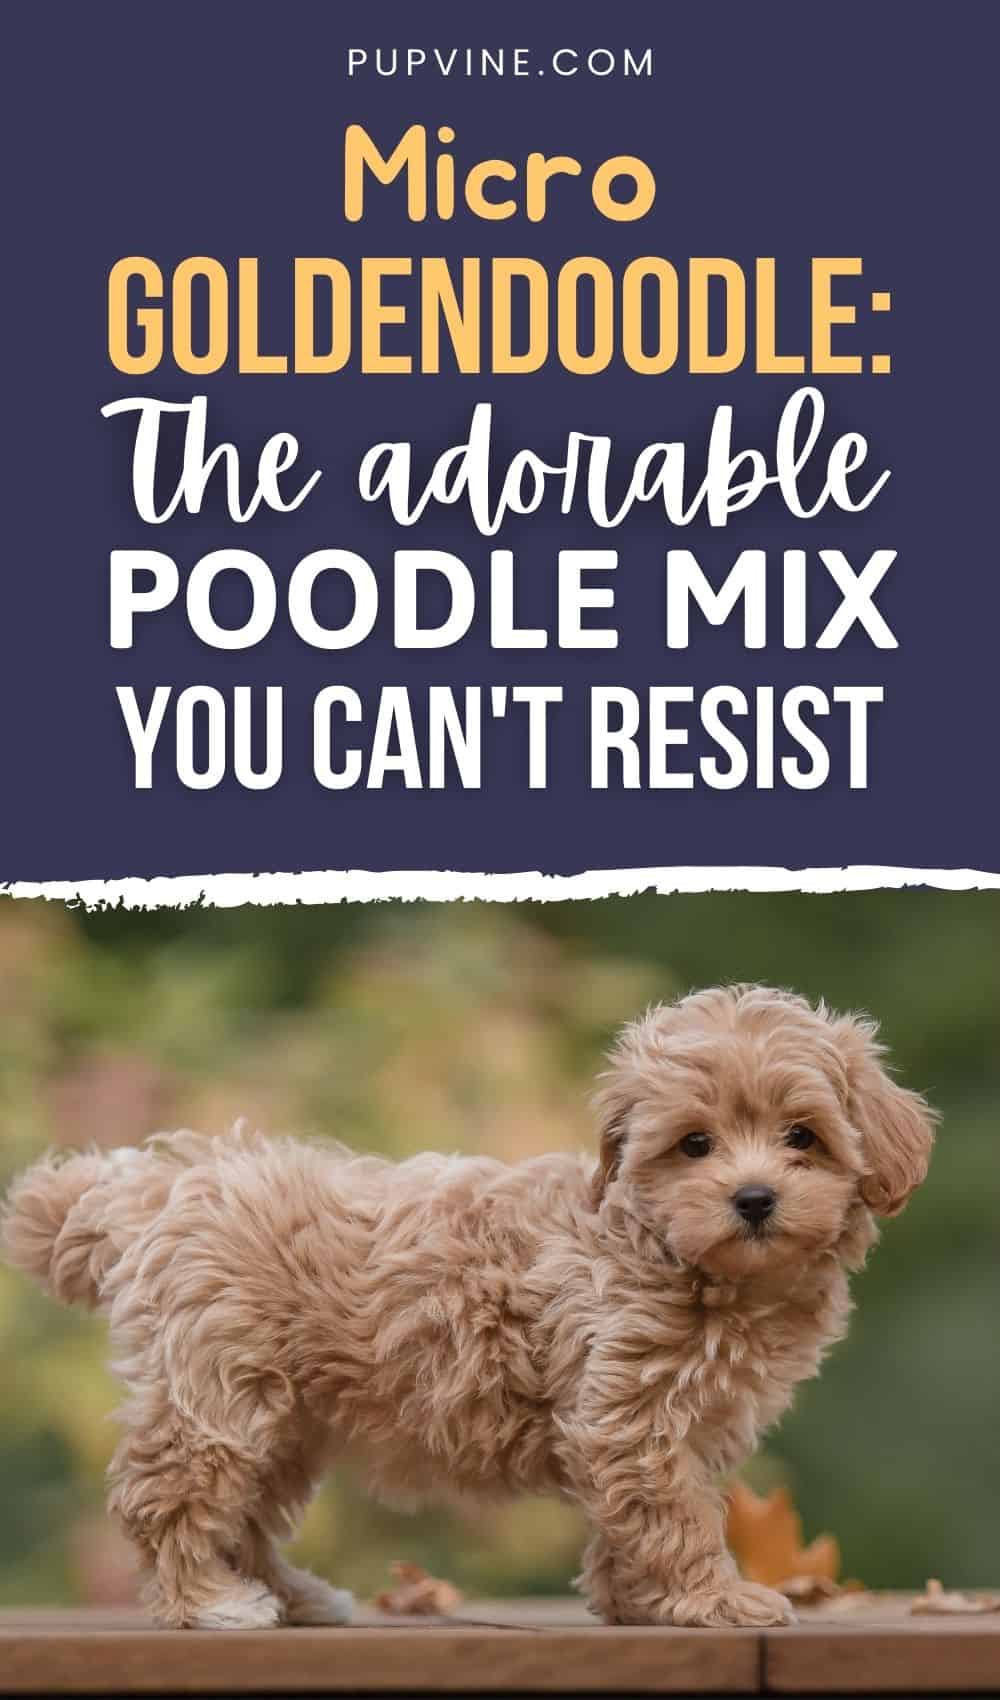 Micro Goldendoodle: The Adorable Poodle Mix You Can't Resist